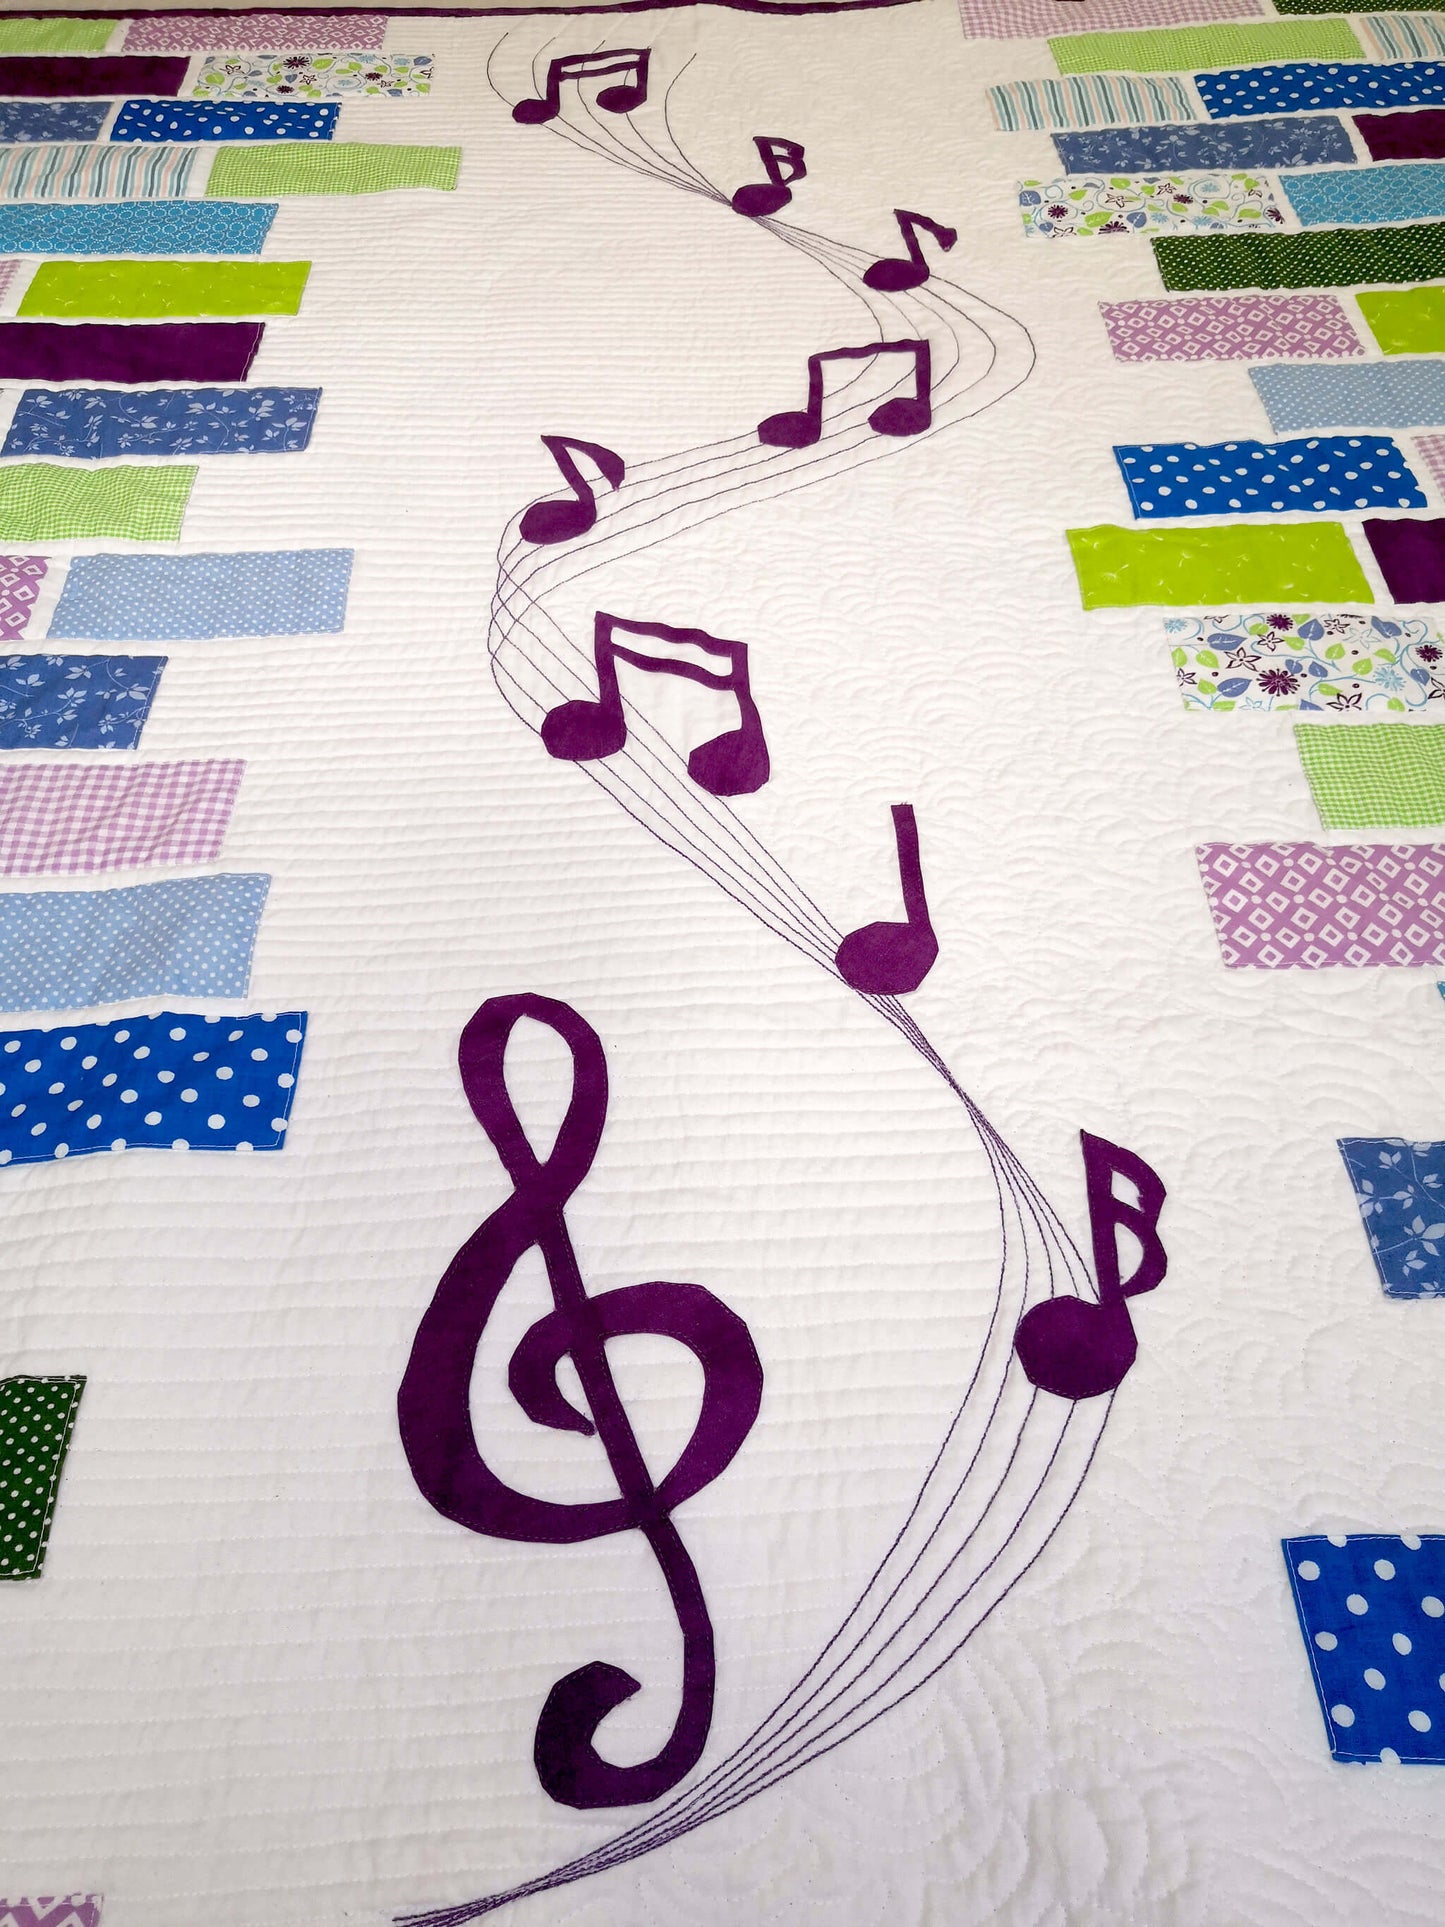 Stave and music note applique on the "Sound of Music" quilt